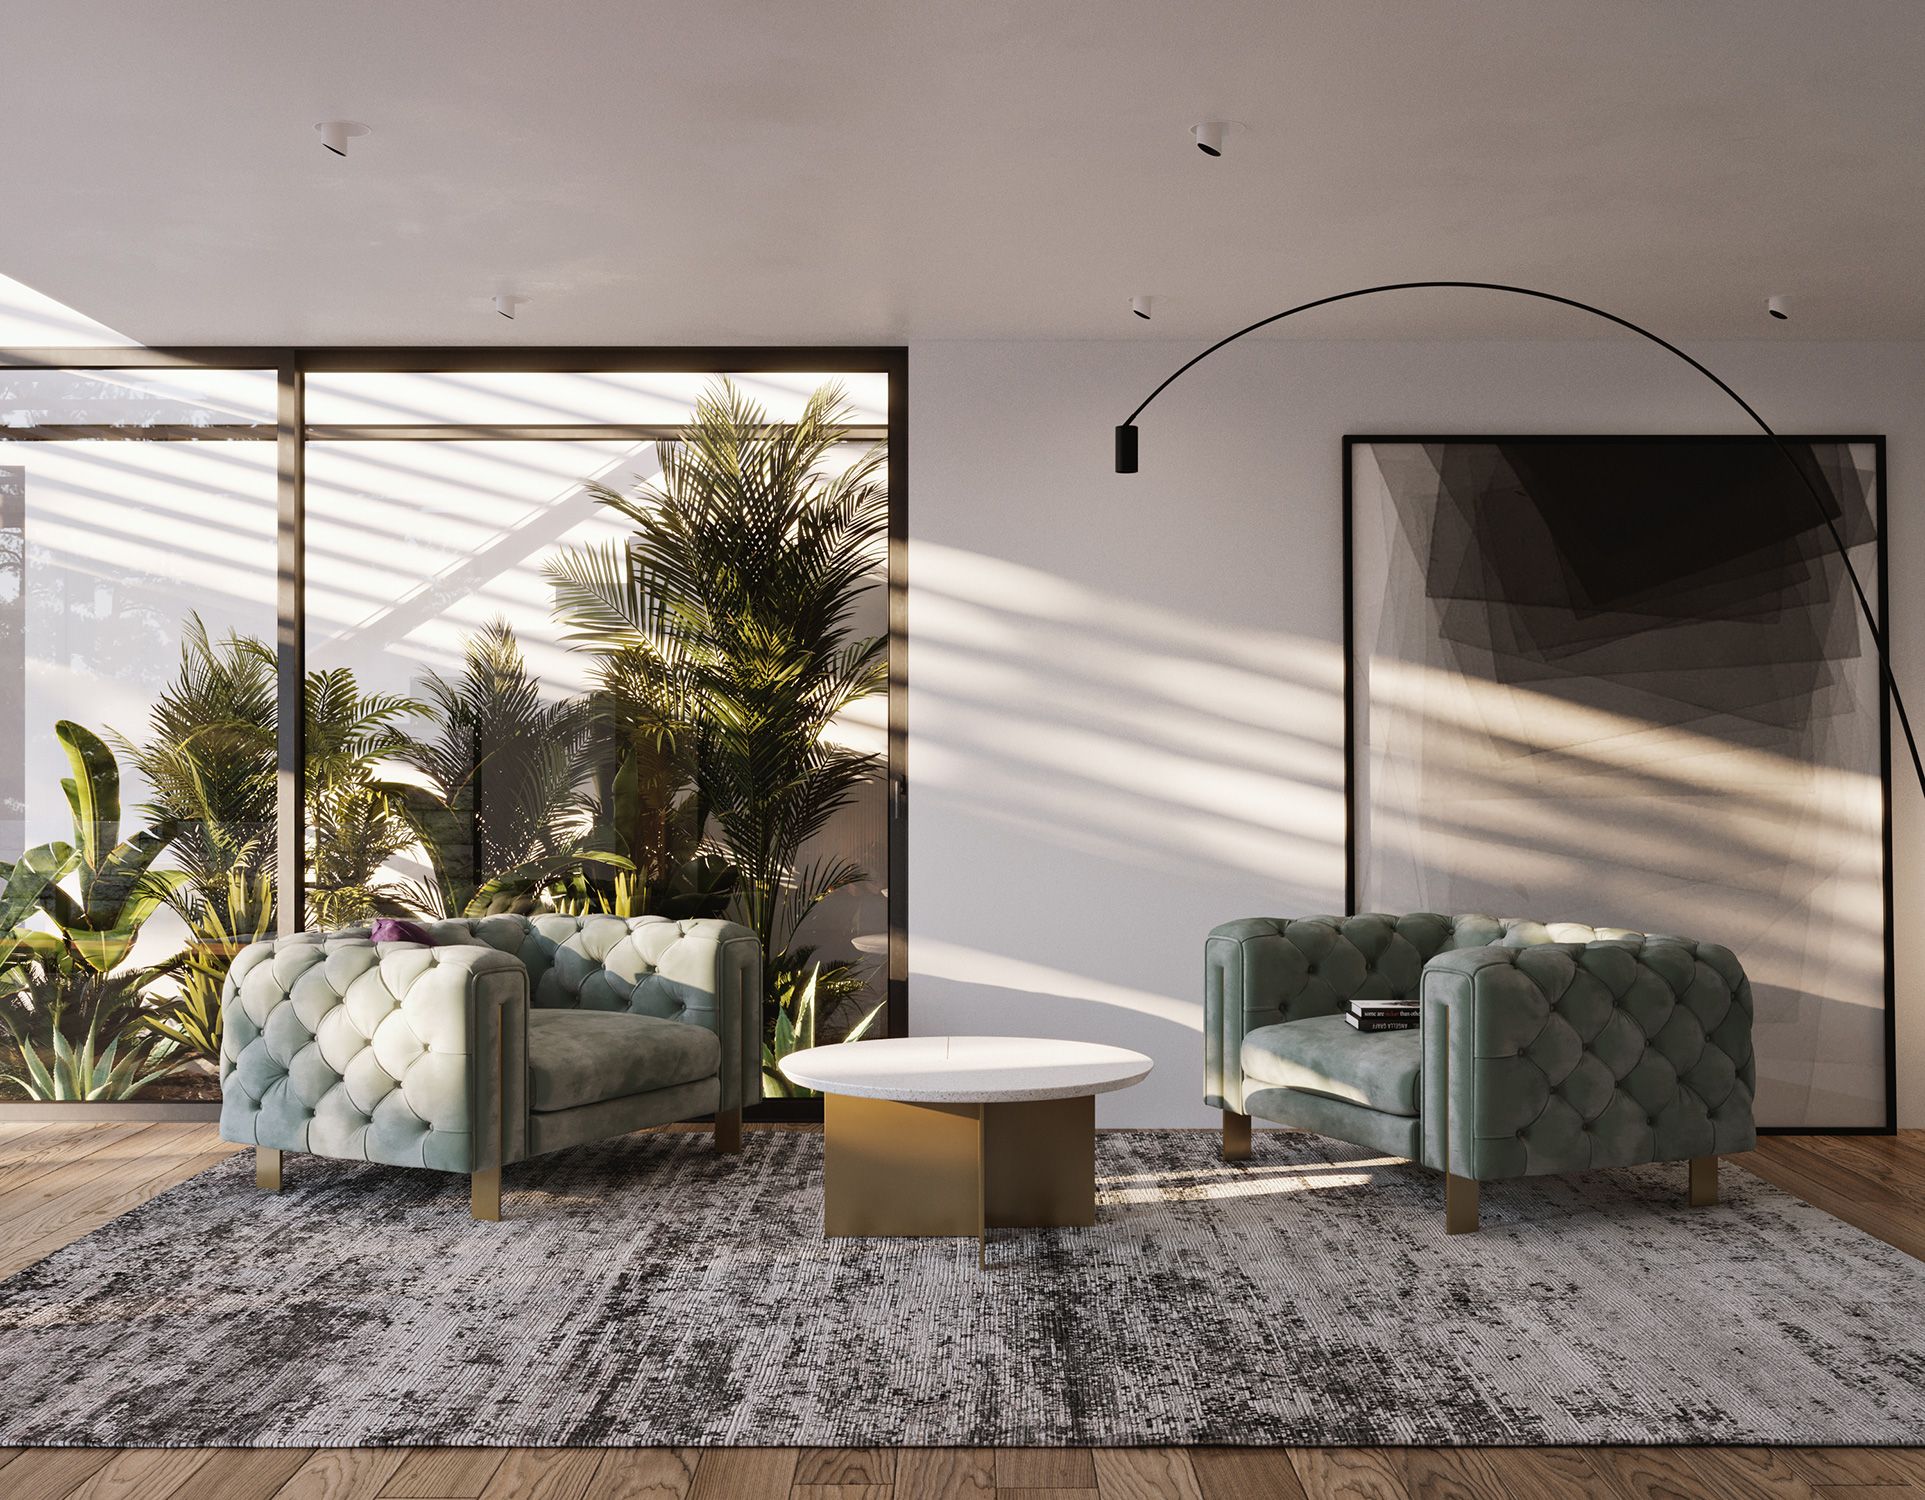 Aljezur - The house with the palm tree - Living room | GDA-V Architectural Visualization